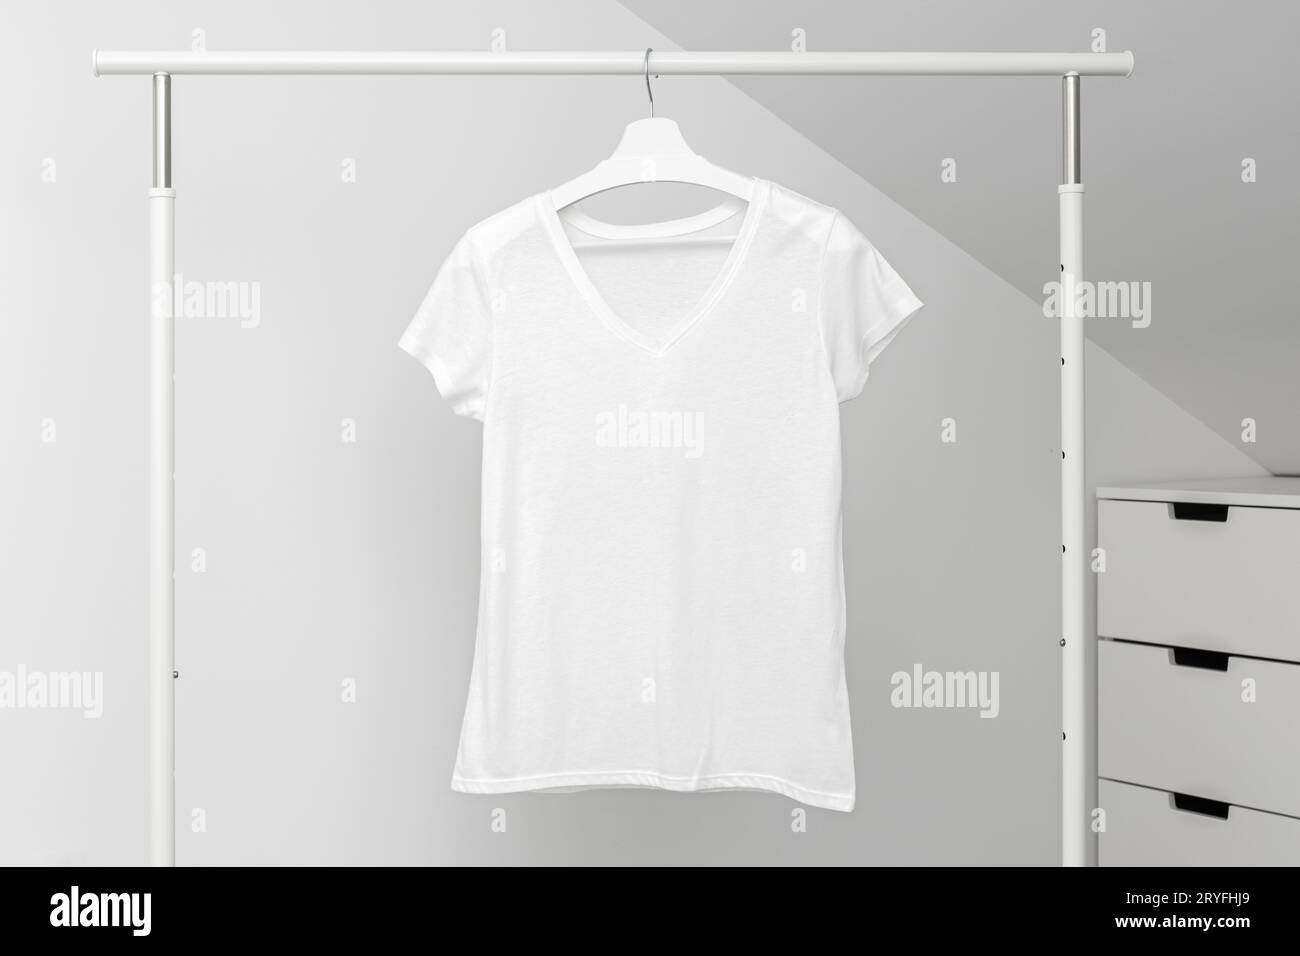 Group of Assorted t-shirts hanging on white hangers. Clothing rack Stock Photo